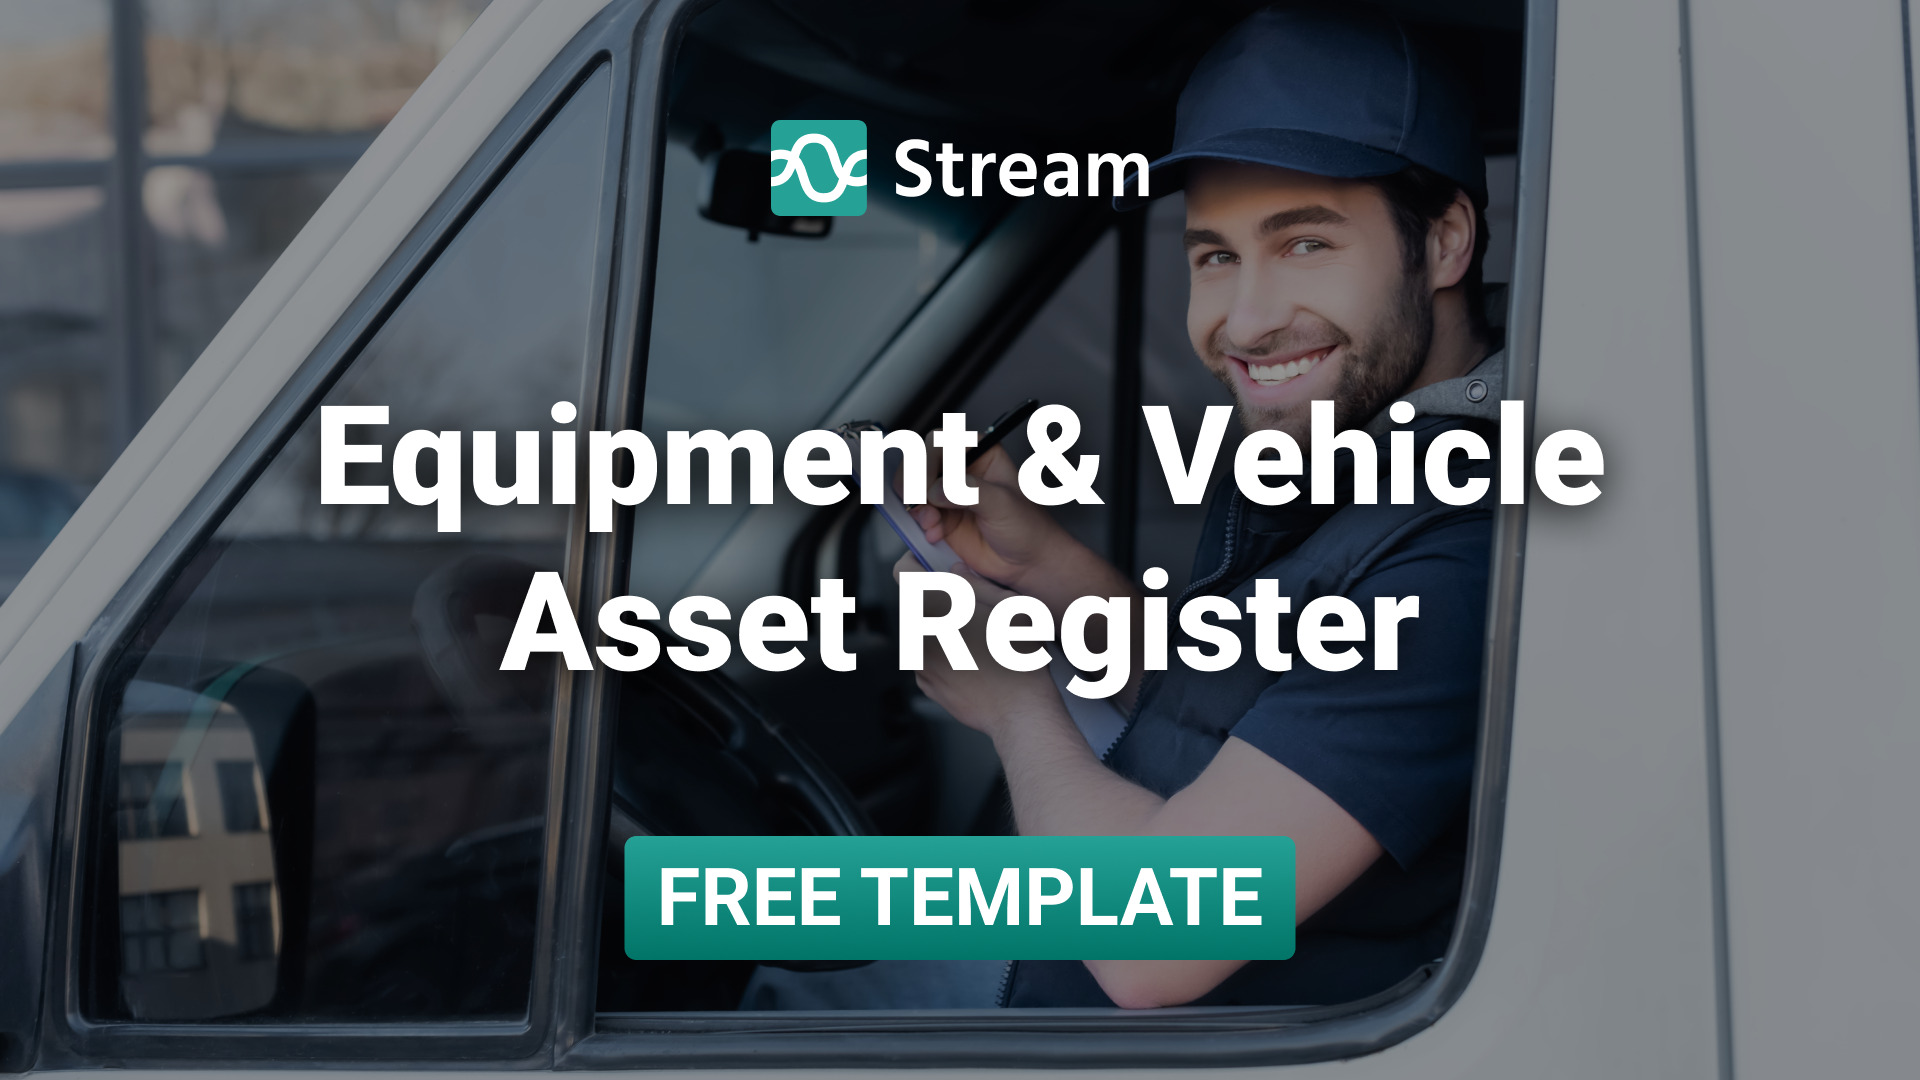 Equipment-and-Vehicle-Asset-Register-Template-FREE-Download-Featured-Image